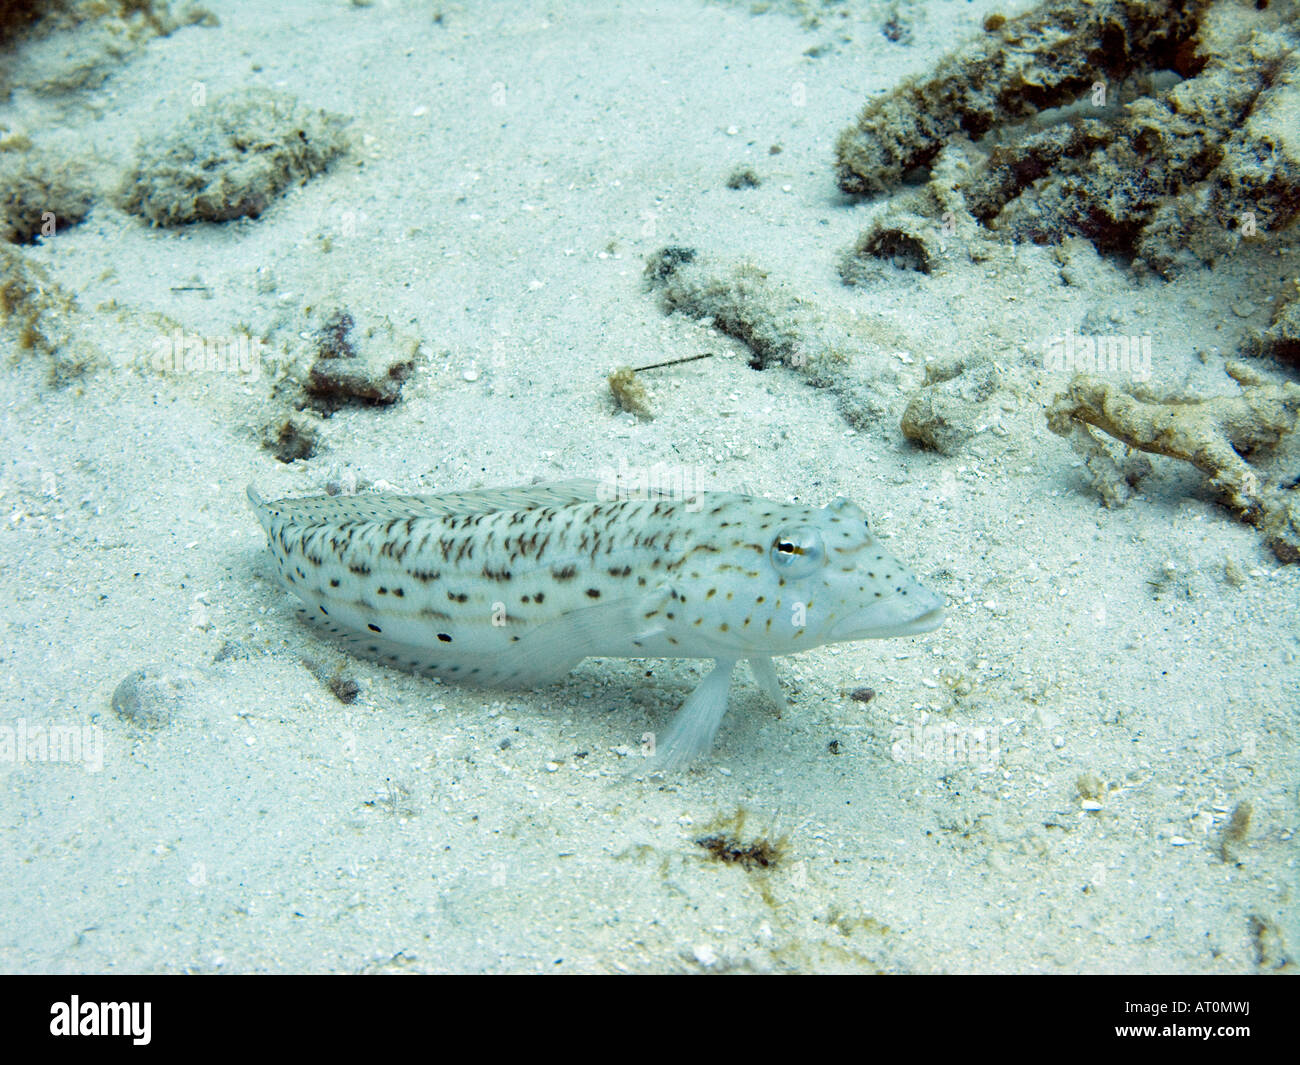 Speckled sandperch, Parapercis hexophthalma resting on sand February 2008, Surin islands, Andaman sea, Thailand Stock Photo